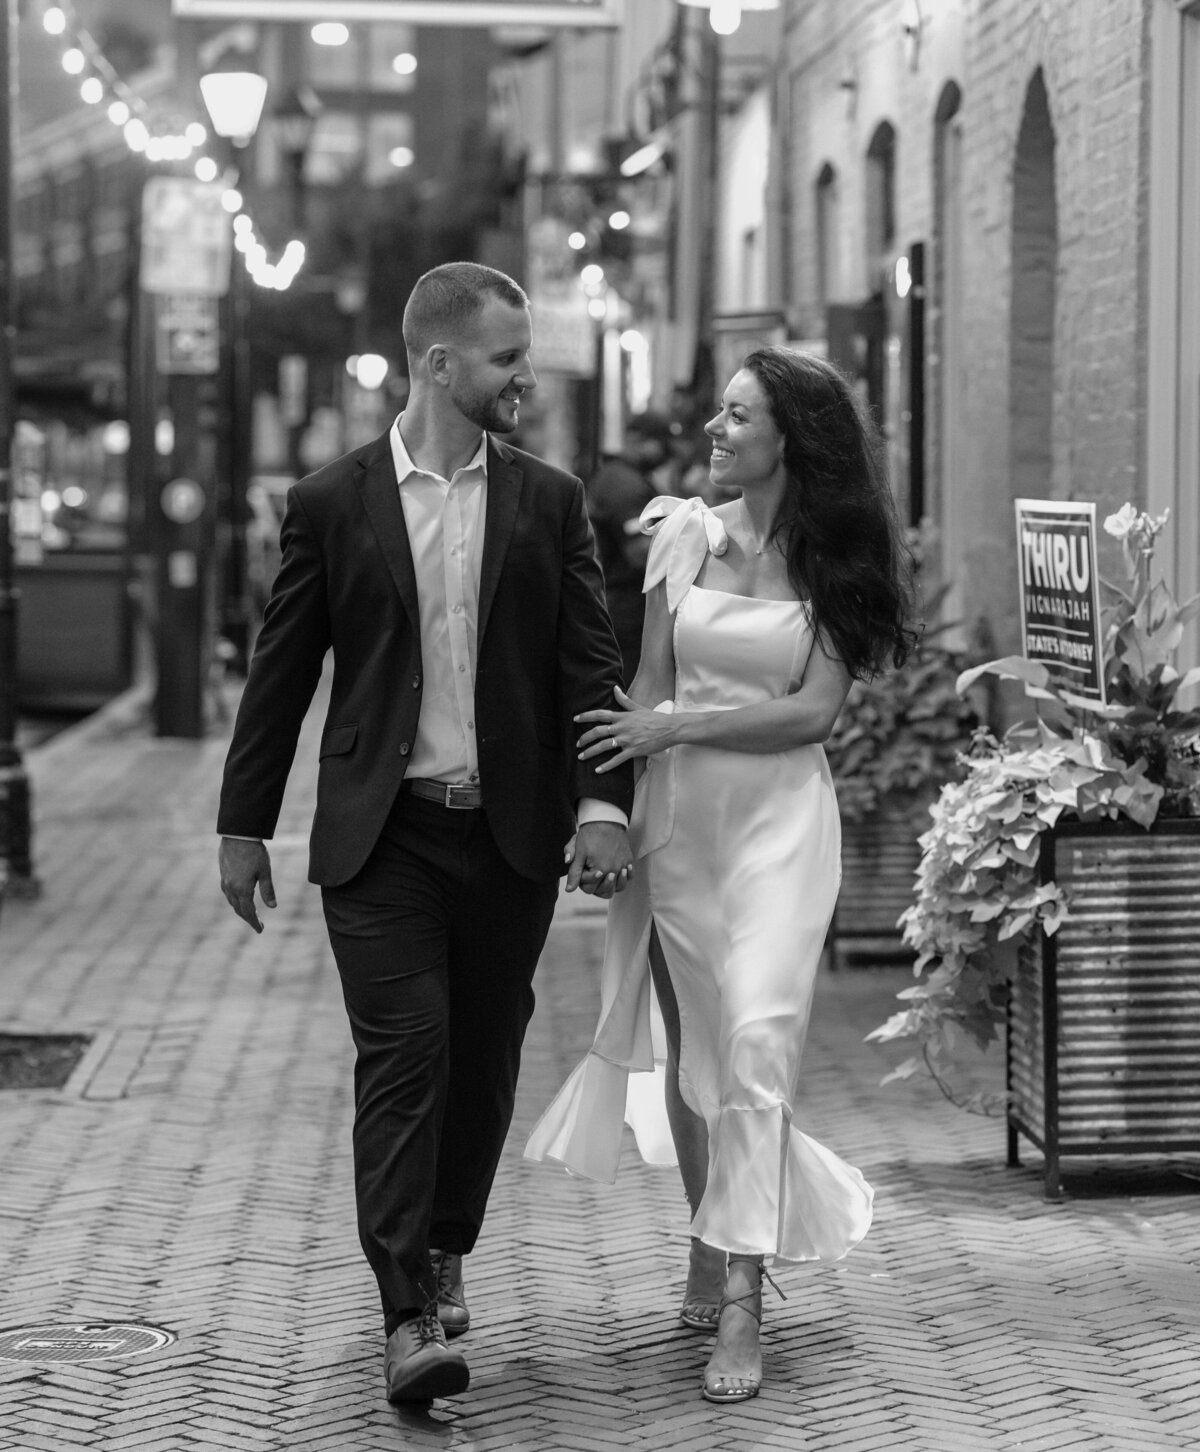 classy man and woman engagement session holding arms city streets in baltimore maryland